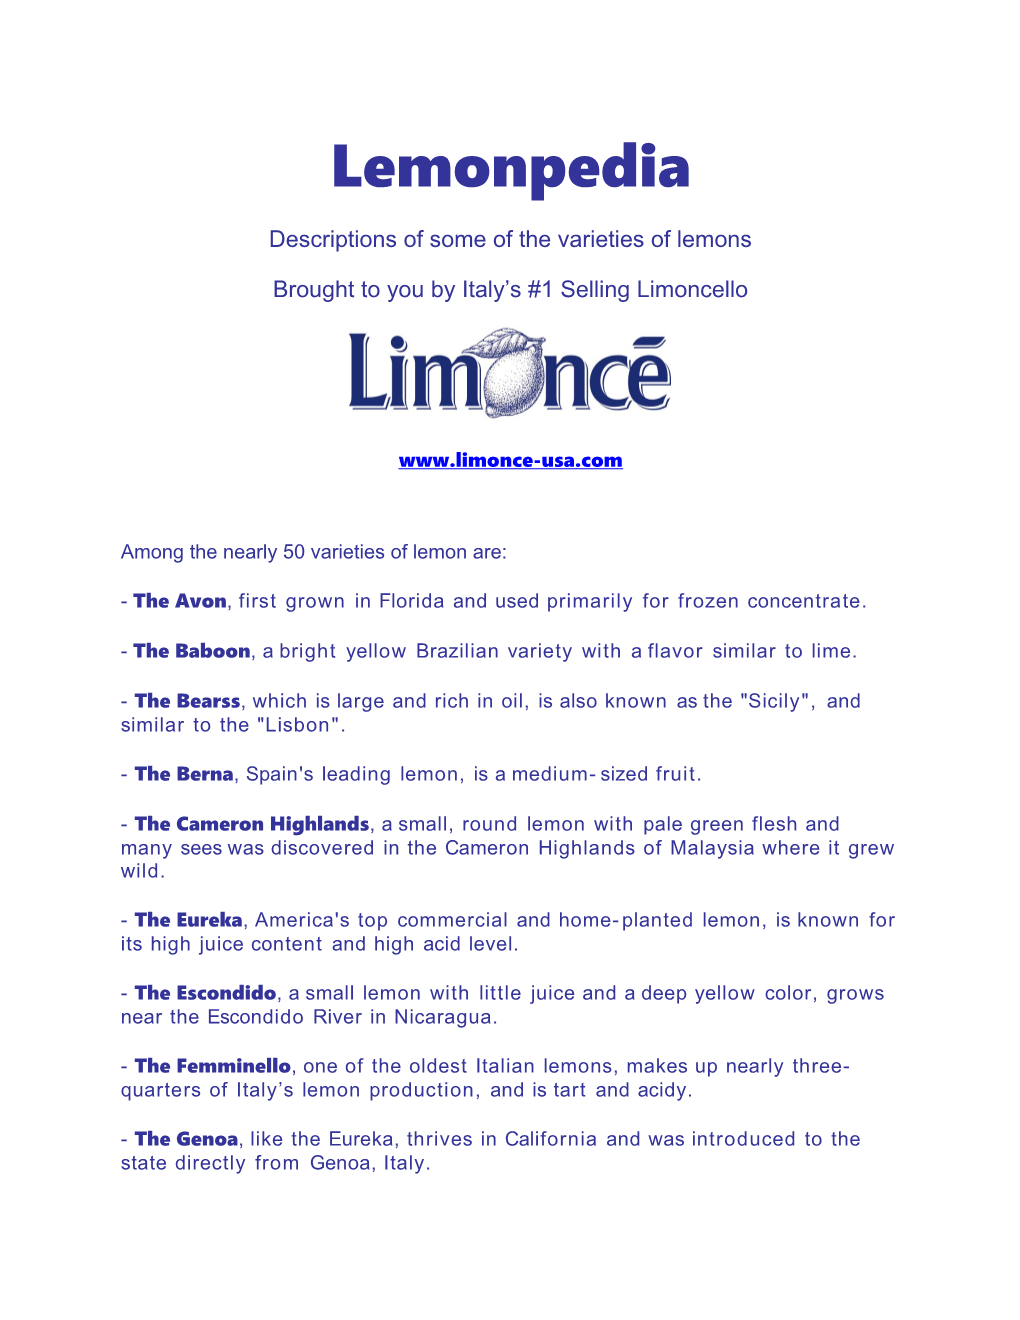 Descriptions of Some of the Varieties of Lemons